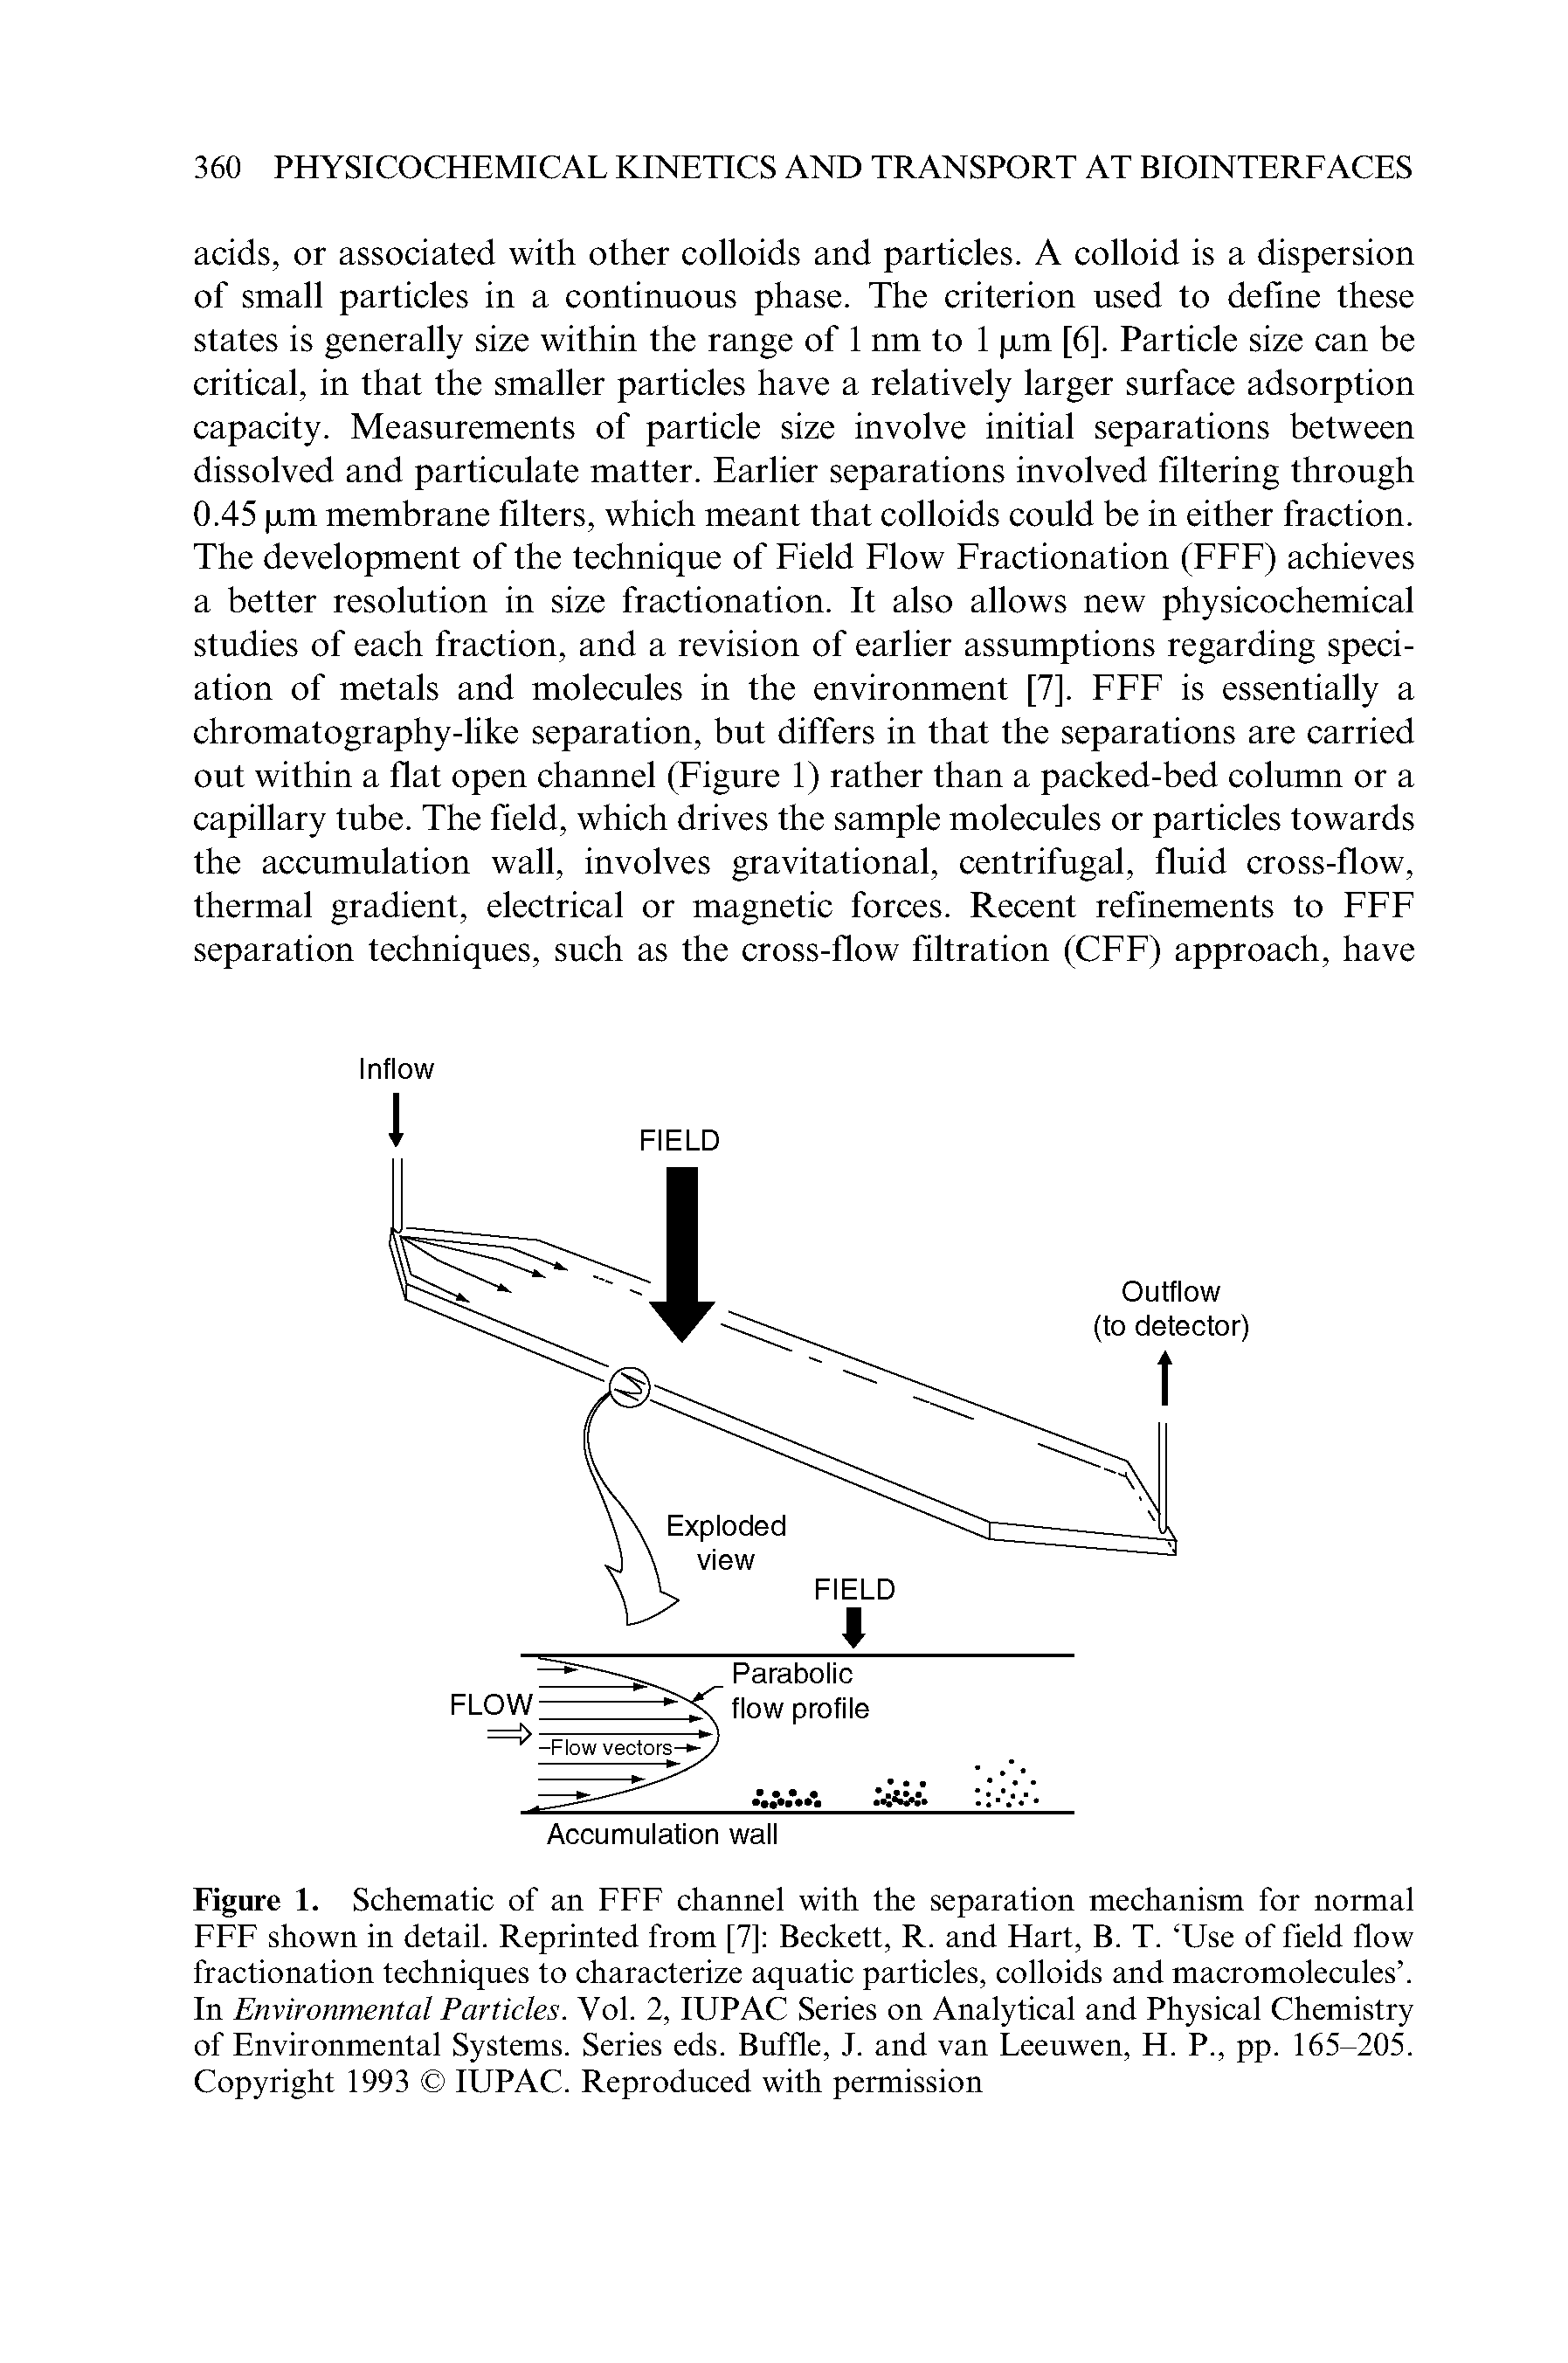 Figure 1. Schematic of an FFF channel with the separation mechanism for normal FFF shown in detail. Reprinted from [7] Beckett, R. and Hart, B. T. Use of field flow fractionation techniques to characterize aquatic particles, colloids and macromolecules . In Environmental Particles. Vol. 2, IUPAC Series on Analytical and Physical Chemistry of Environmental Systems. Series eds. Buffle, J. and van Leeuwen, H. P., pp. 165-205. Copyright 1993 IUPAC. Reproduced with permission...